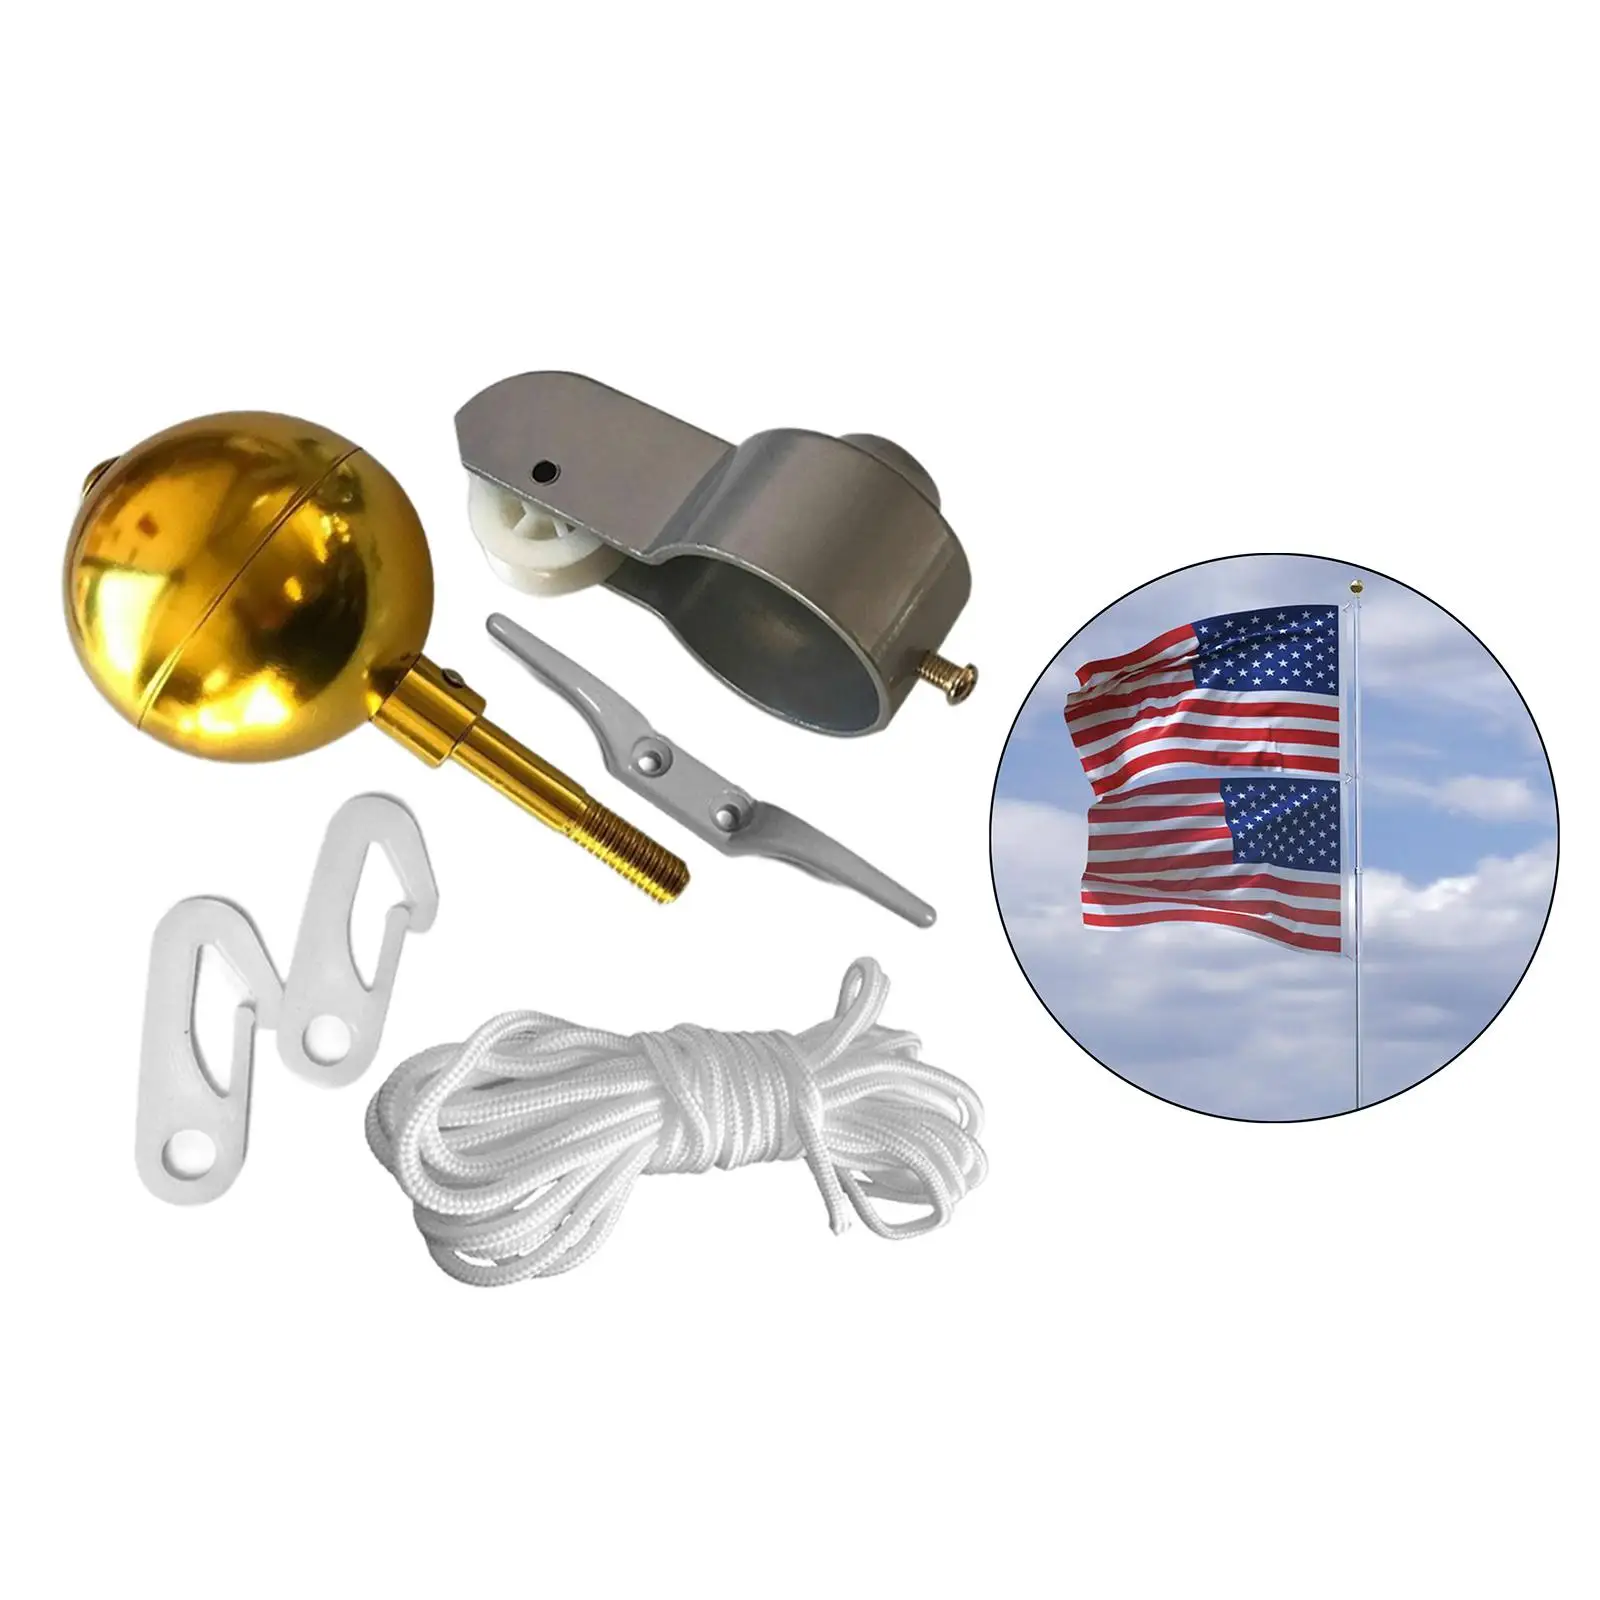 Flag Pole Hardware Parts Flagpole Attachment + Flagpole Pulley Truck